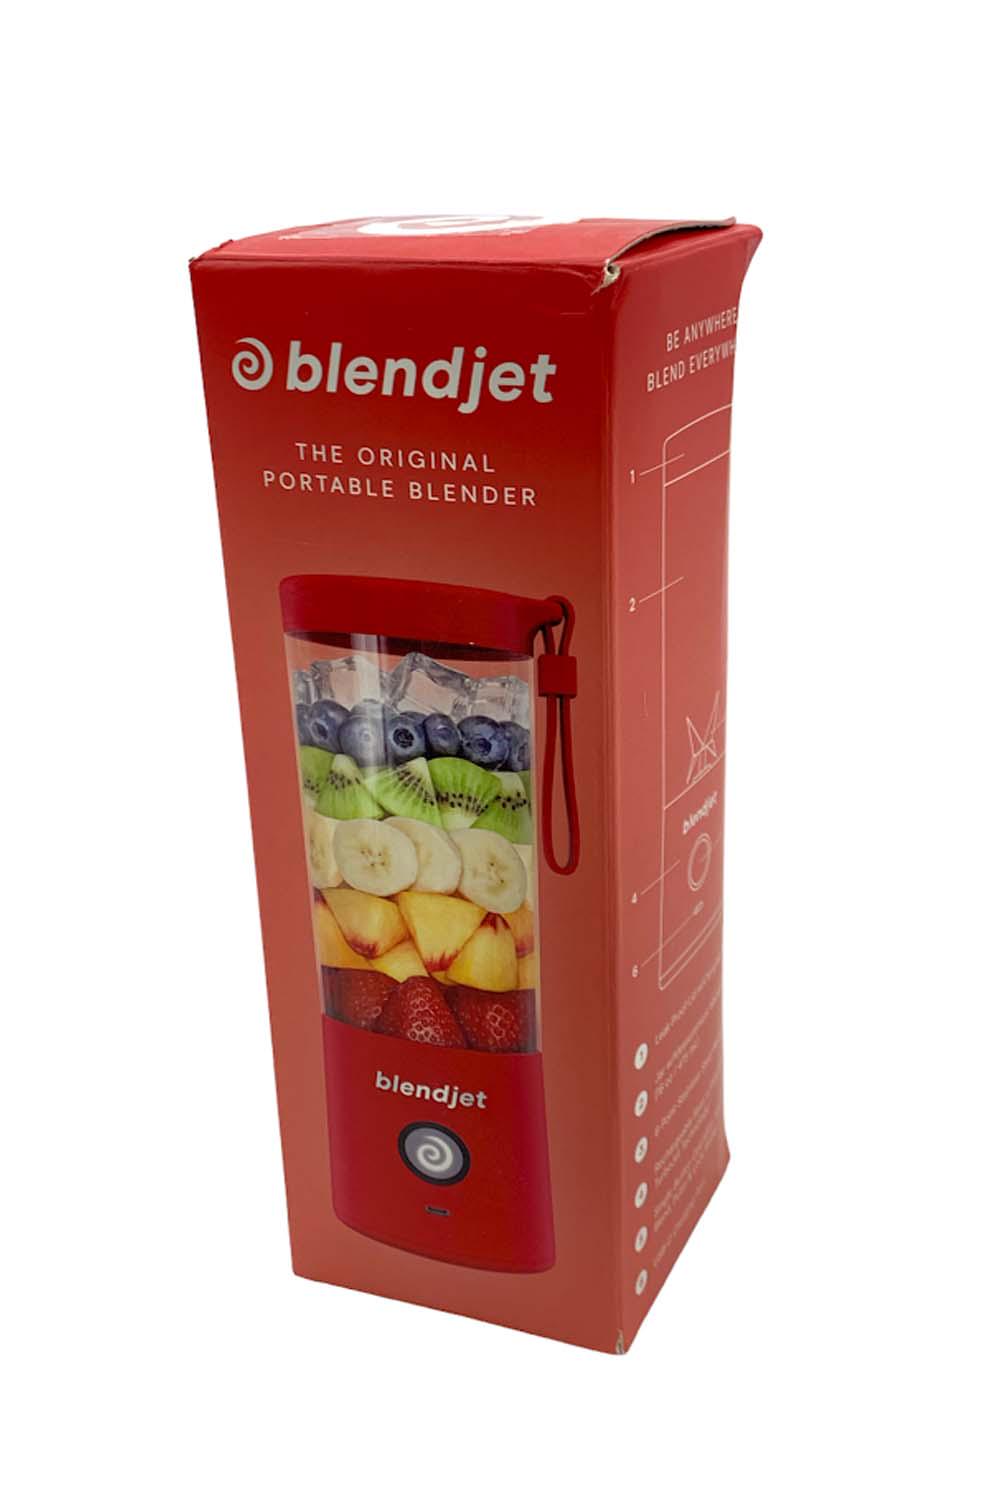 BLENDJET 2 Cordless USB Rechargeable Portable Blender 20 OZ RED New In Box